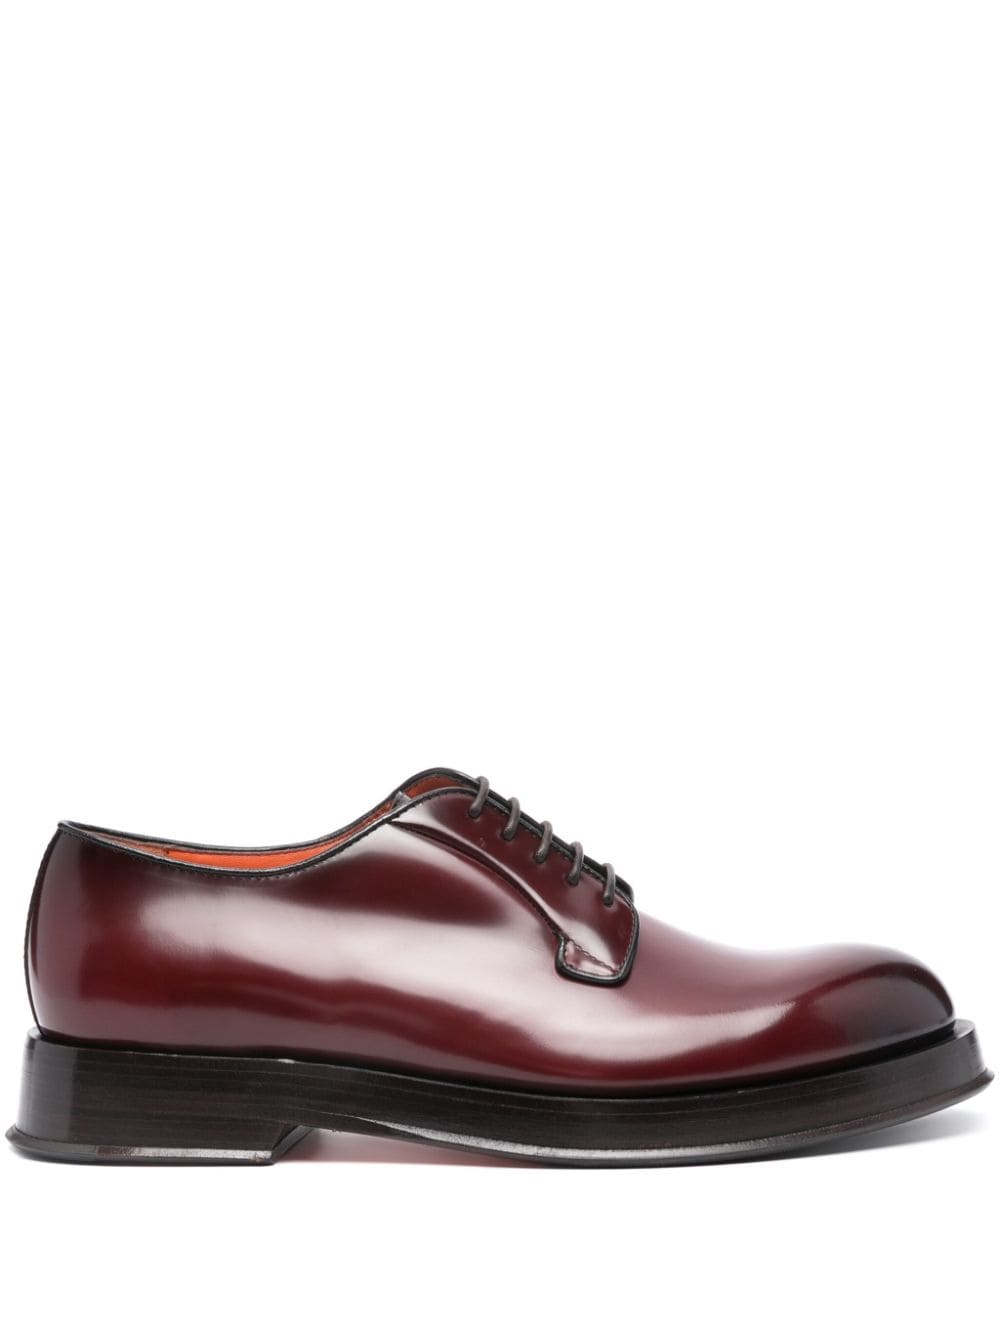 Santoni calf leather derby shoes - Red